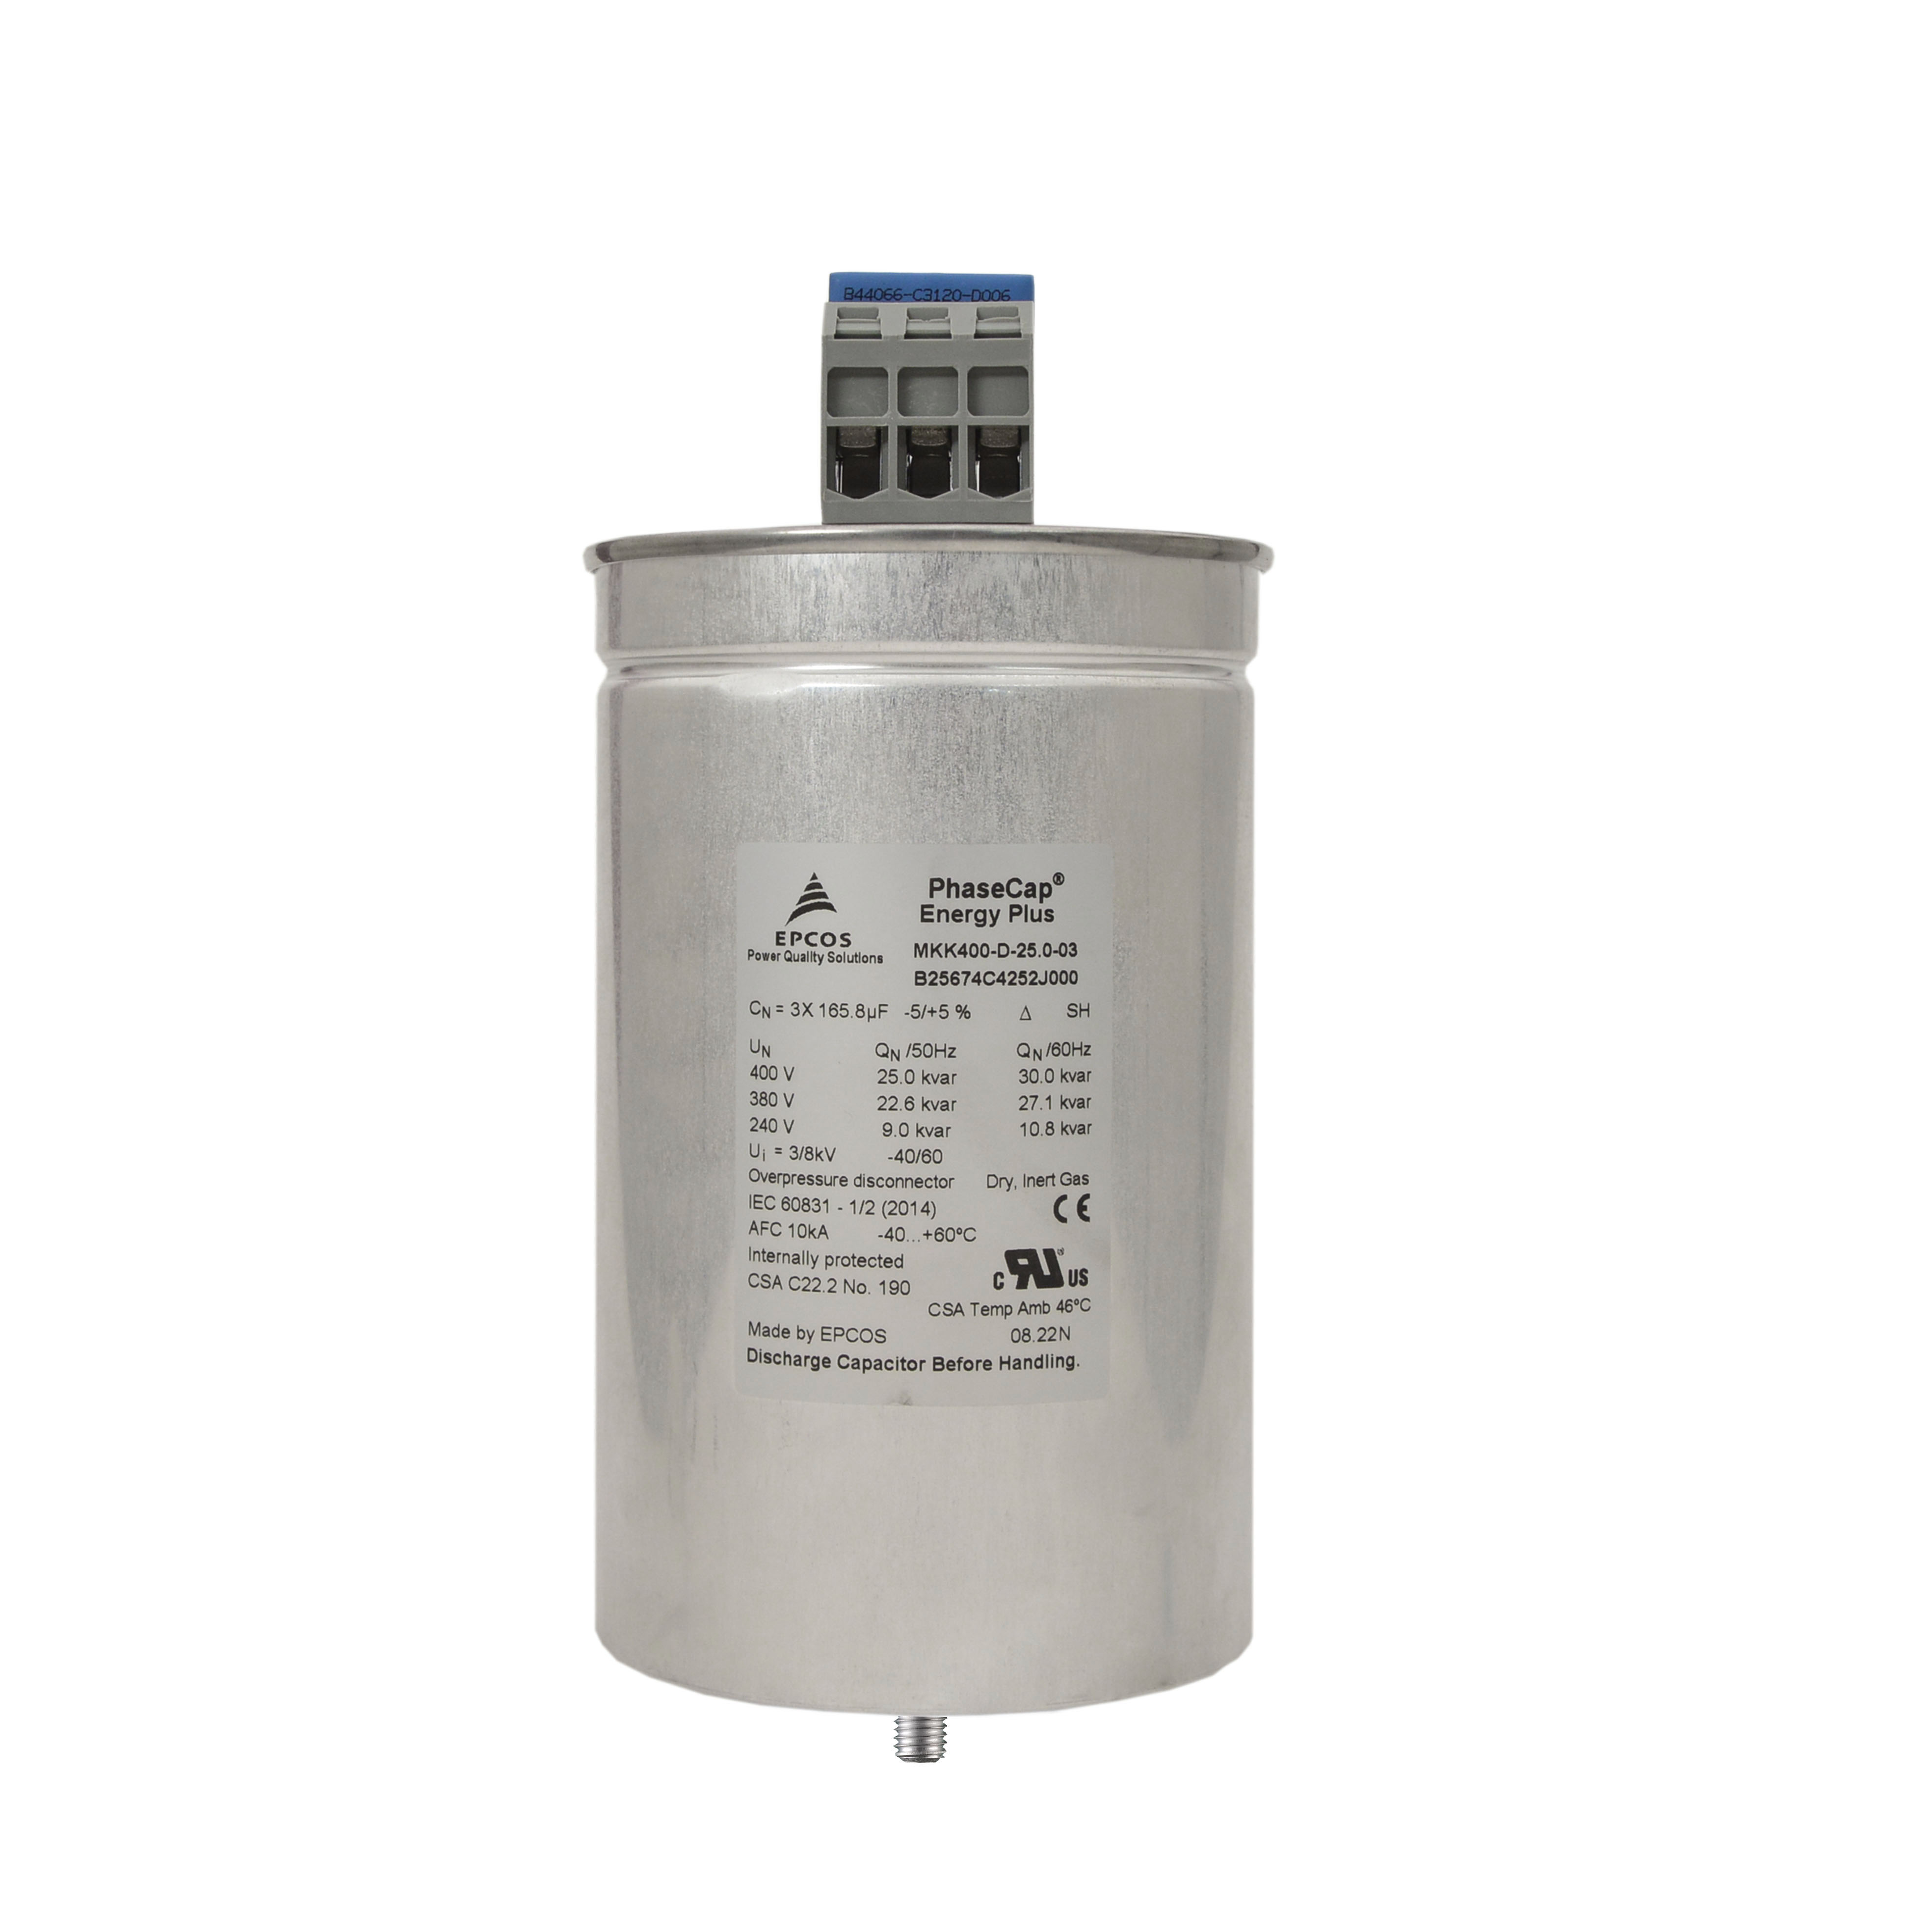 Capacitor Phasecap Energy 400v